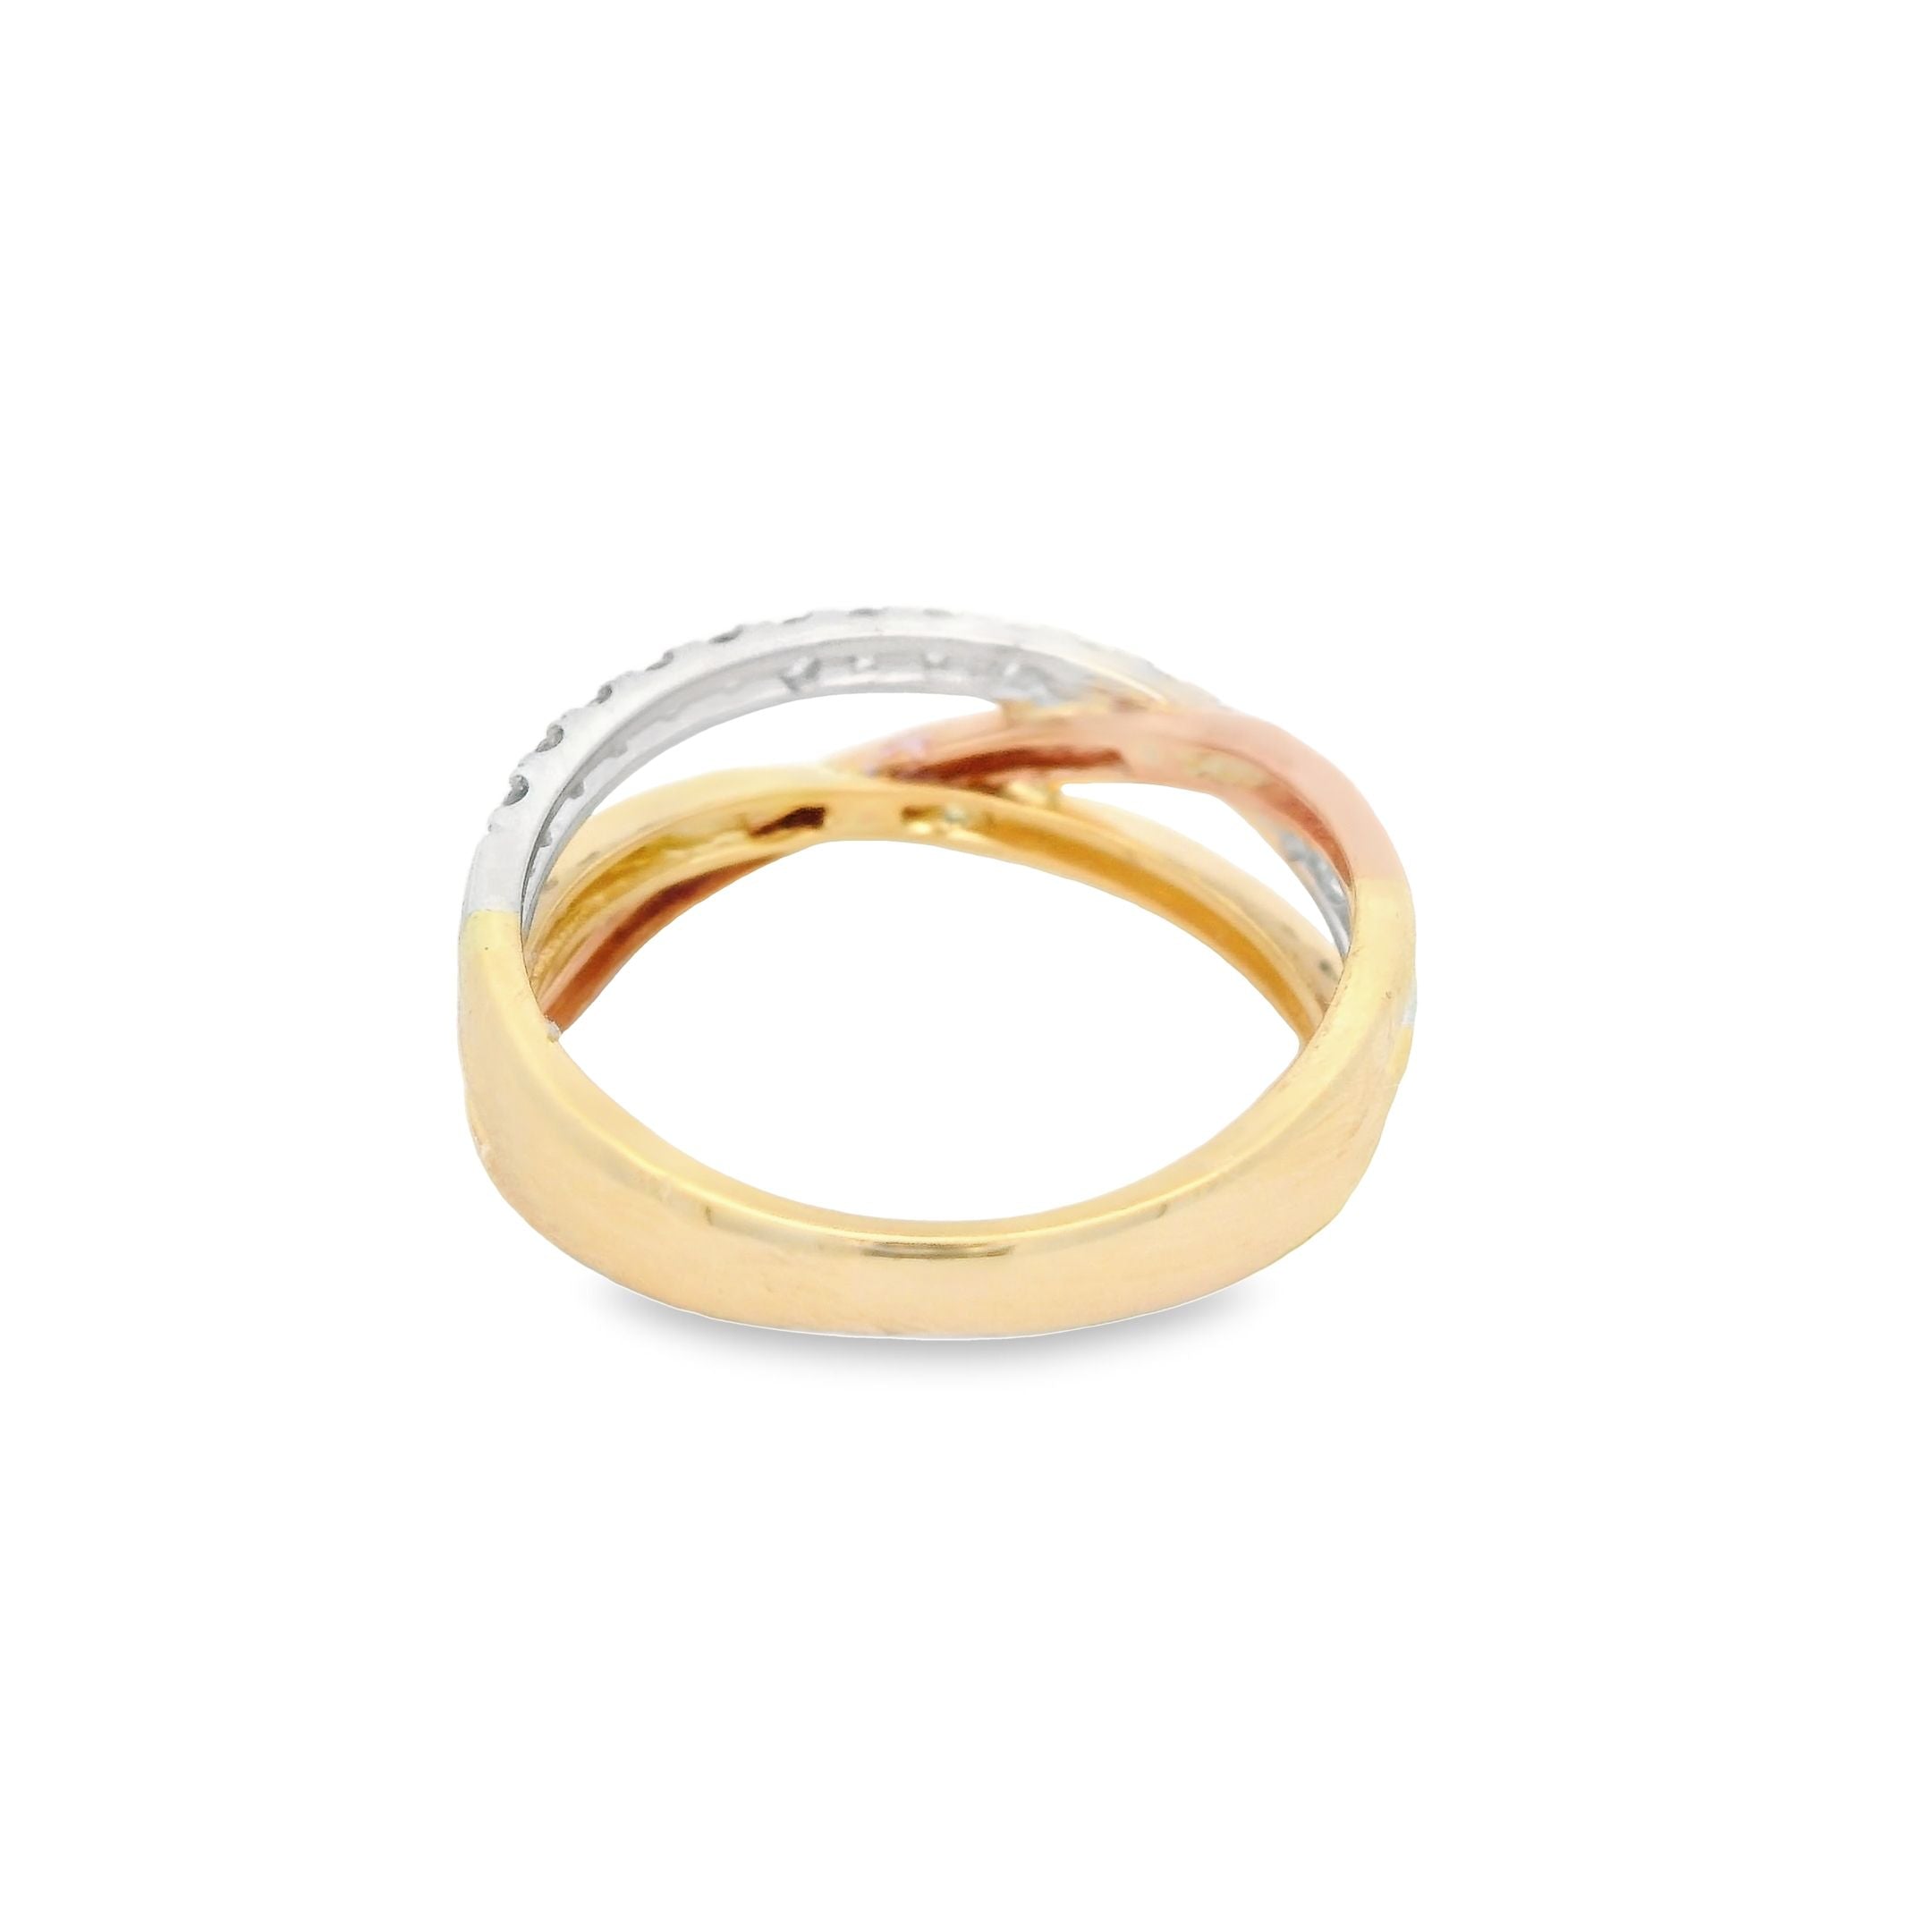 Tri Colored Crossover Diamond Ring 14KYWR